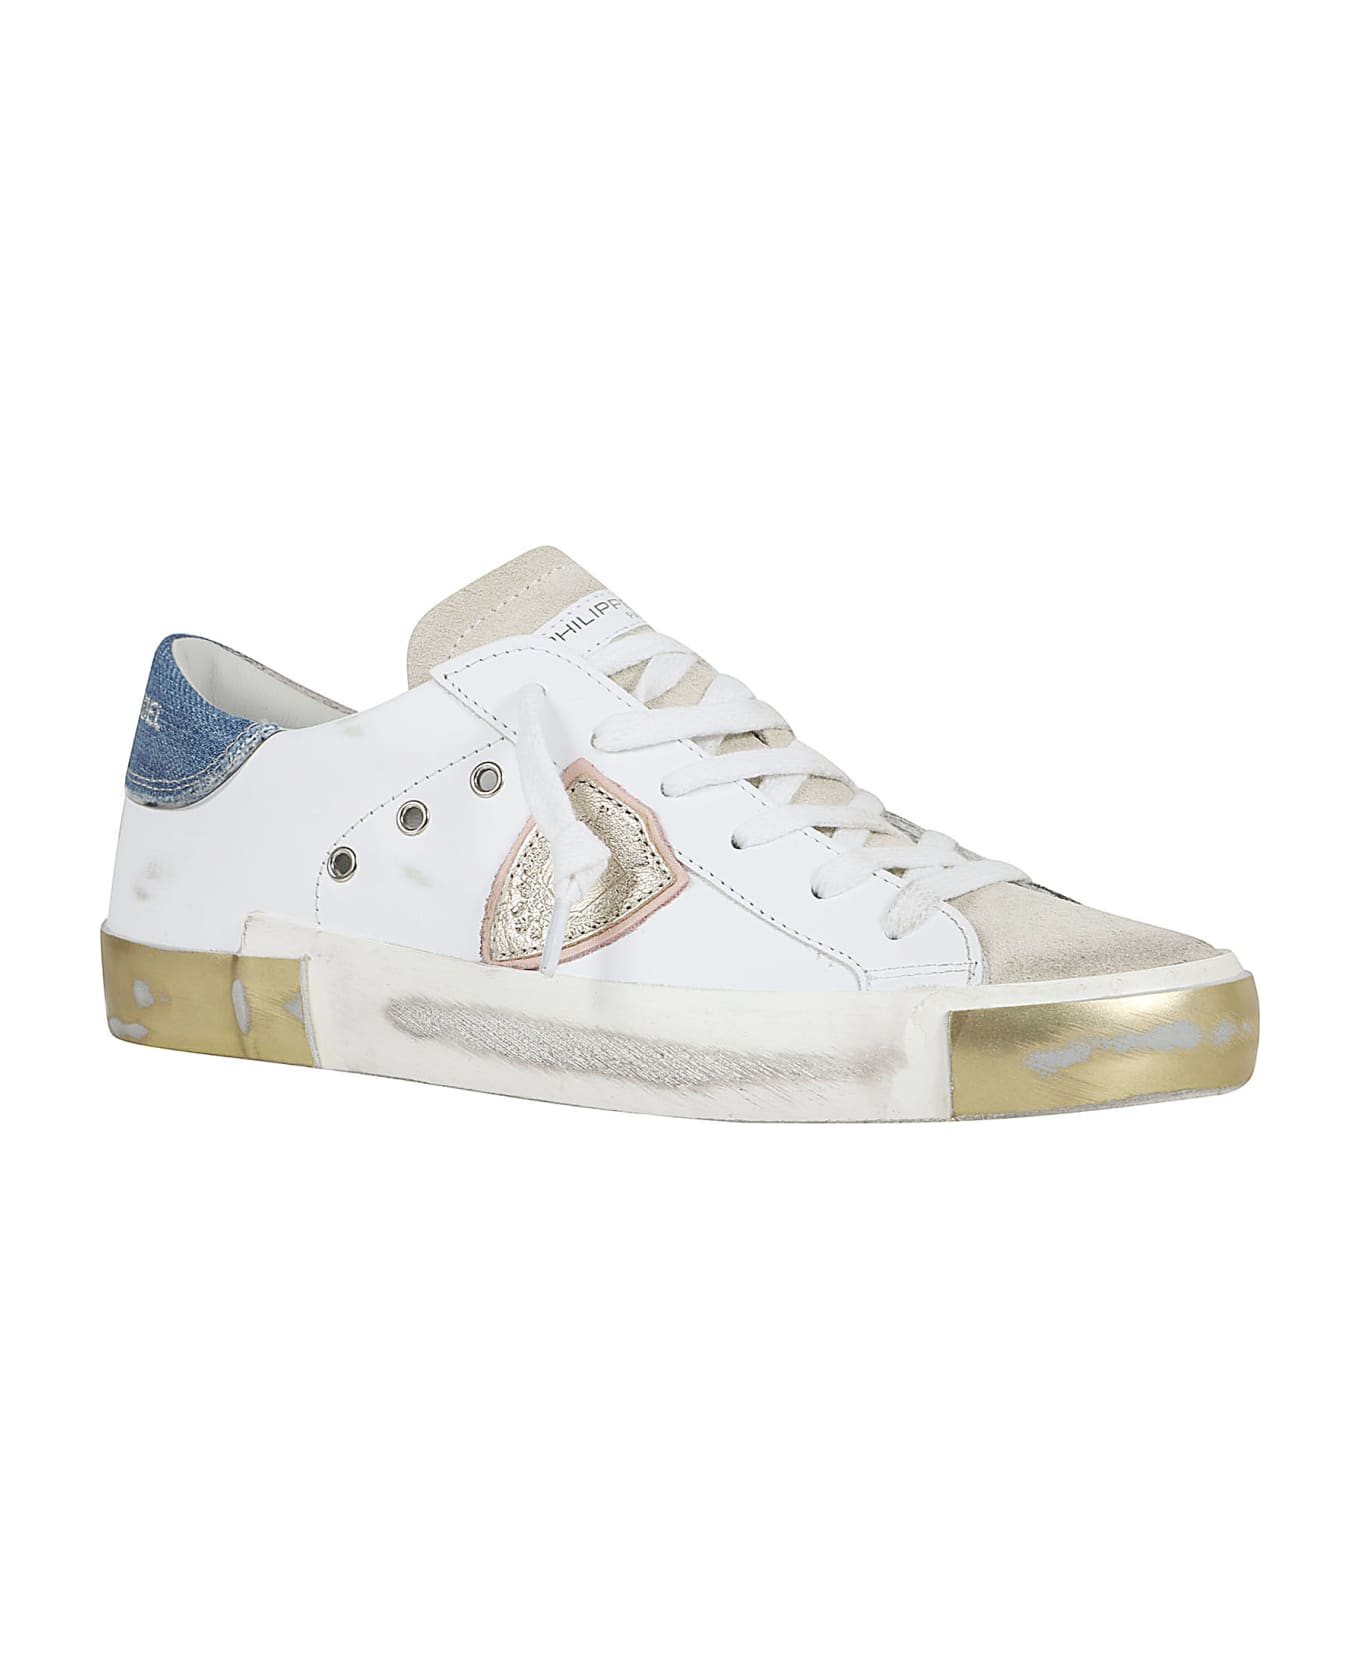 Philippe Model Prsx Low Woman - golden goose superstar low top leather sneakers item